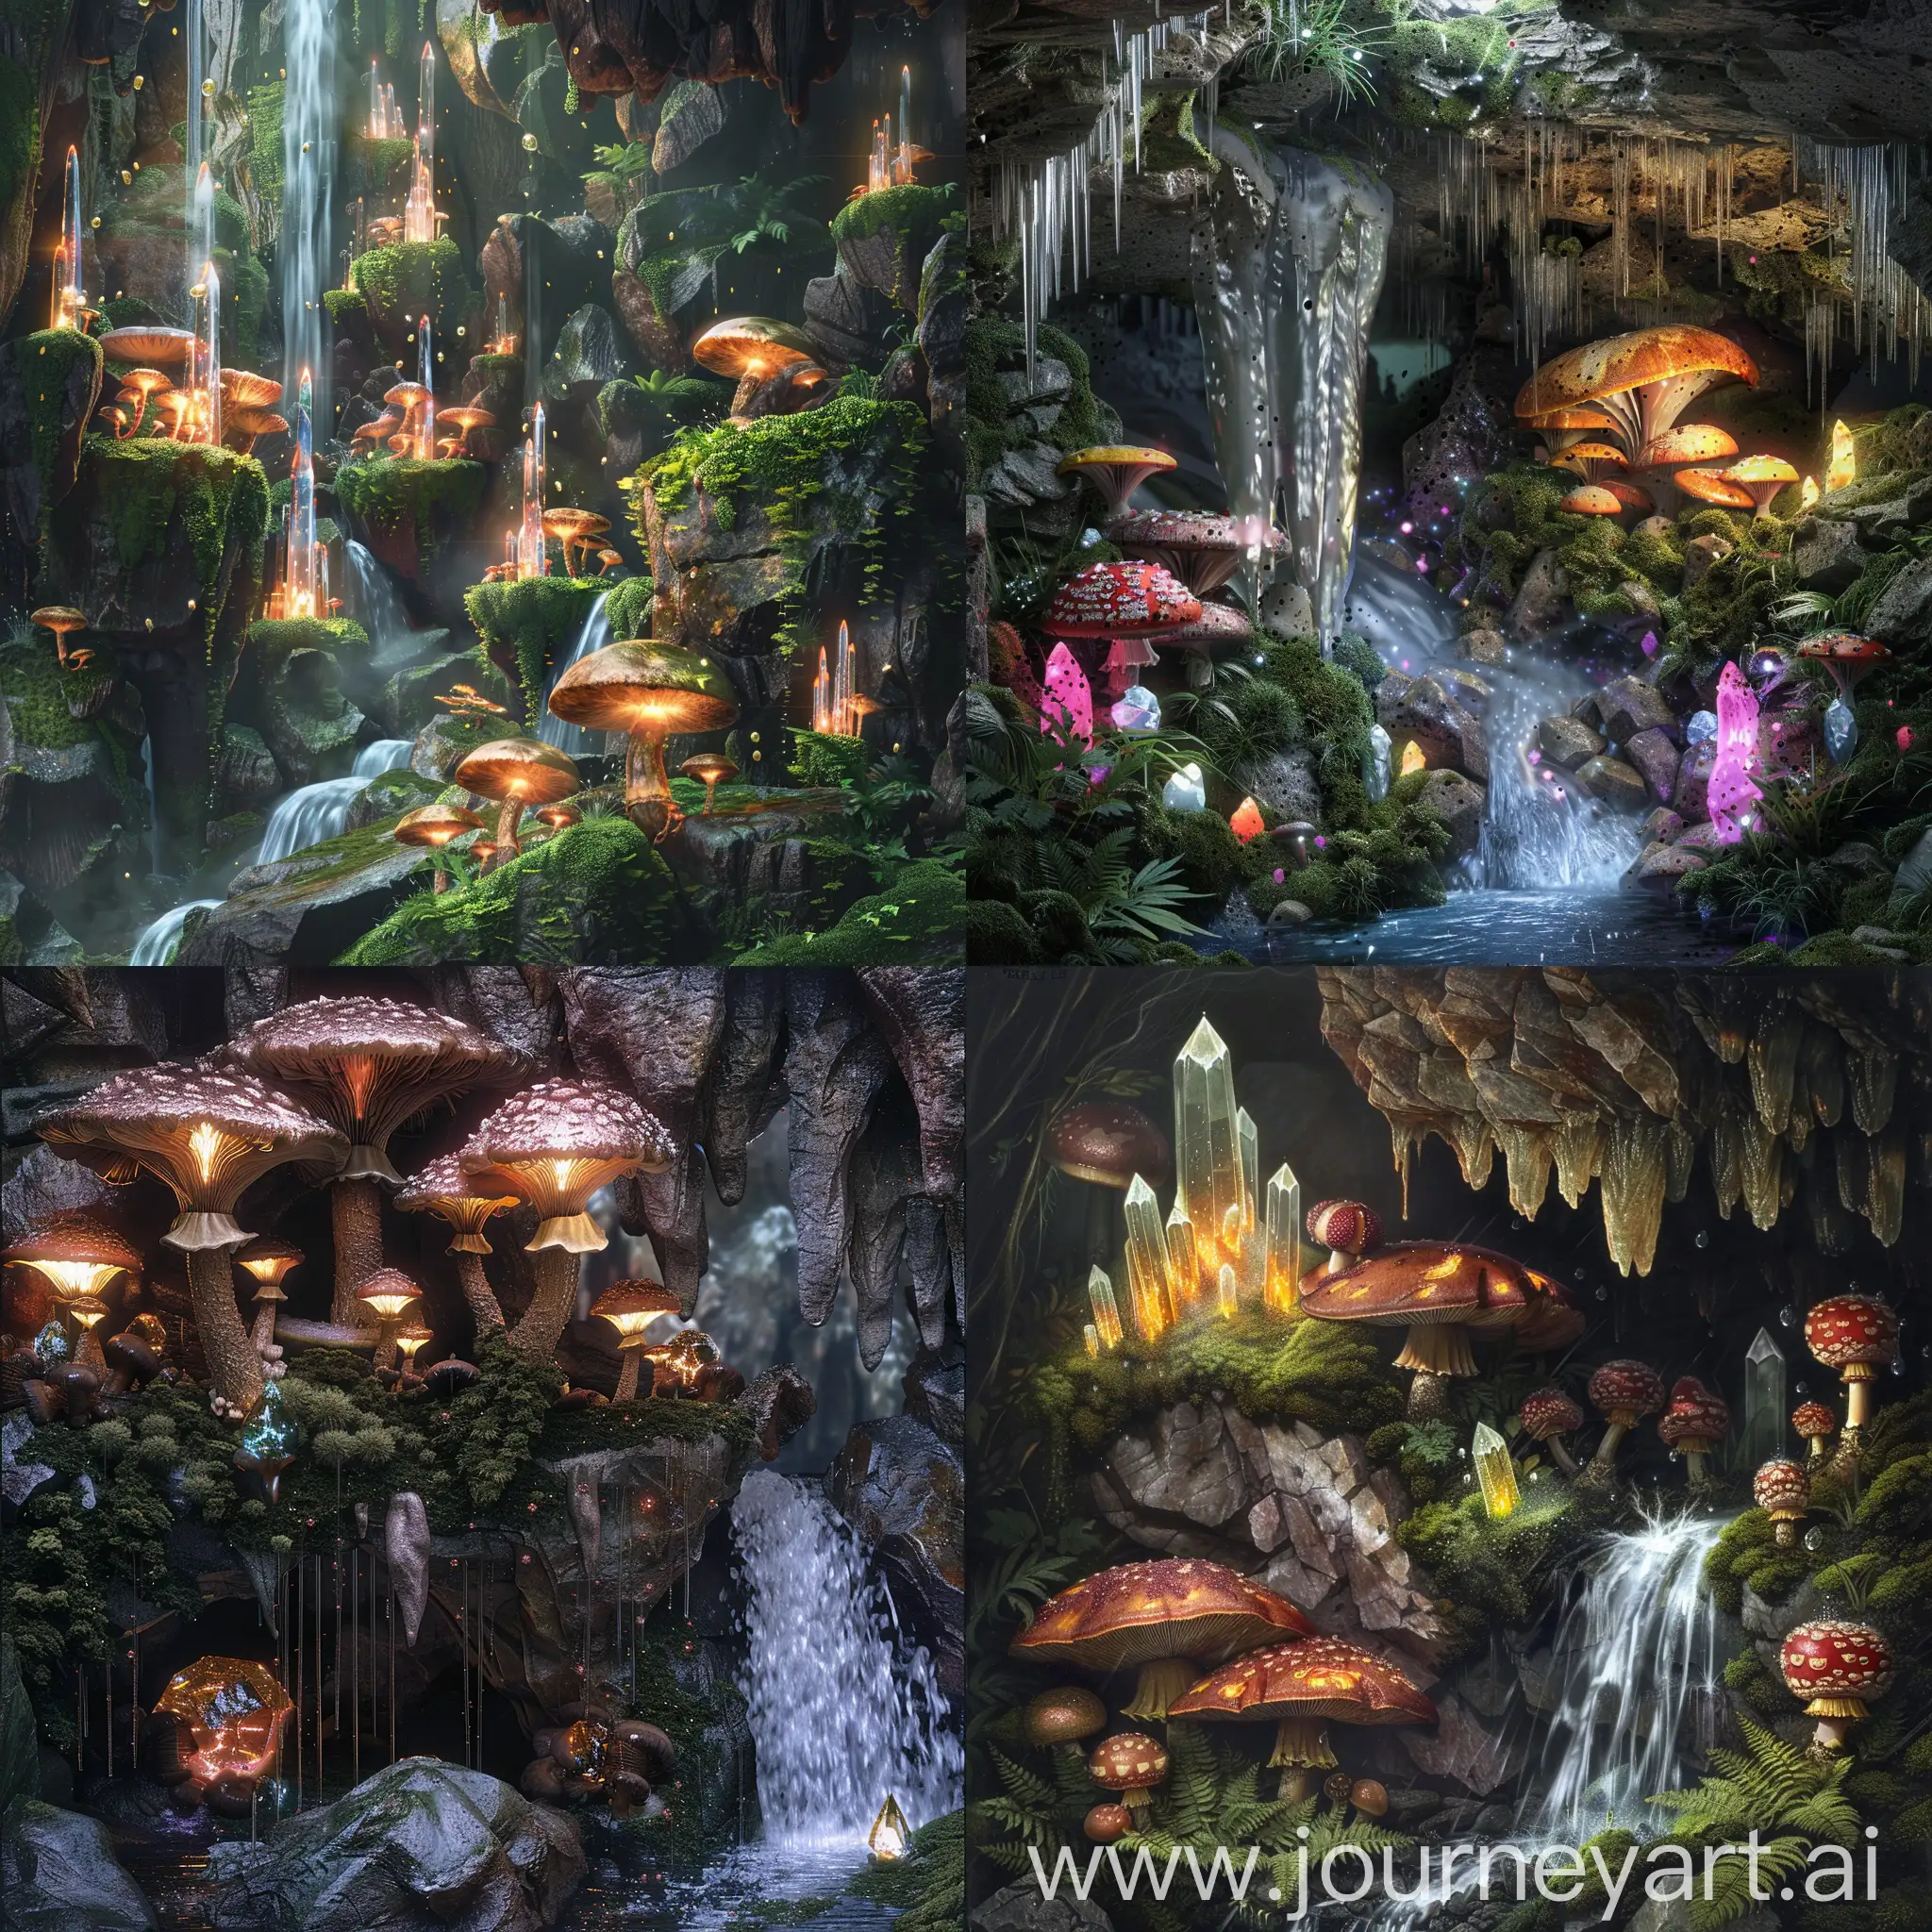 Enchanting-Underground-Cave-with-Waterfall-Moss-Mushrooms-and-Glowing-Crystals